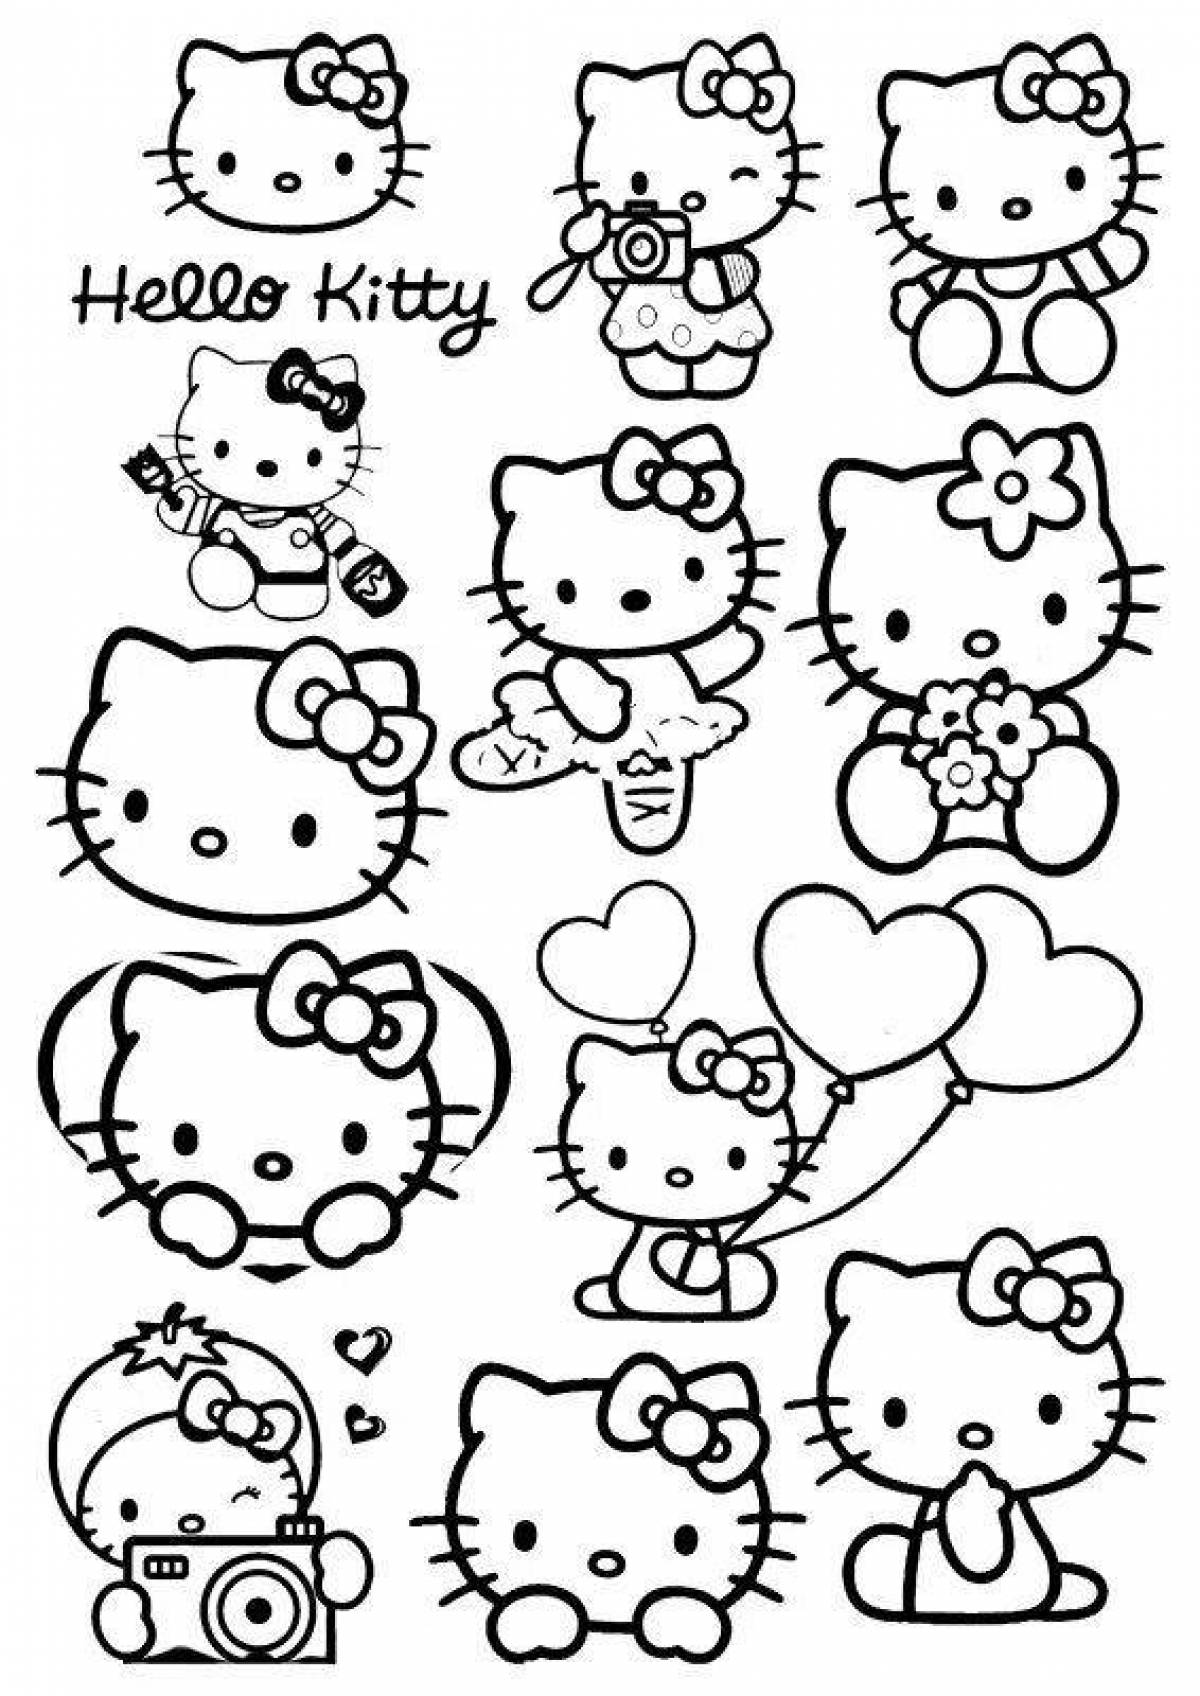 Awesome mini hello kitty coloring book